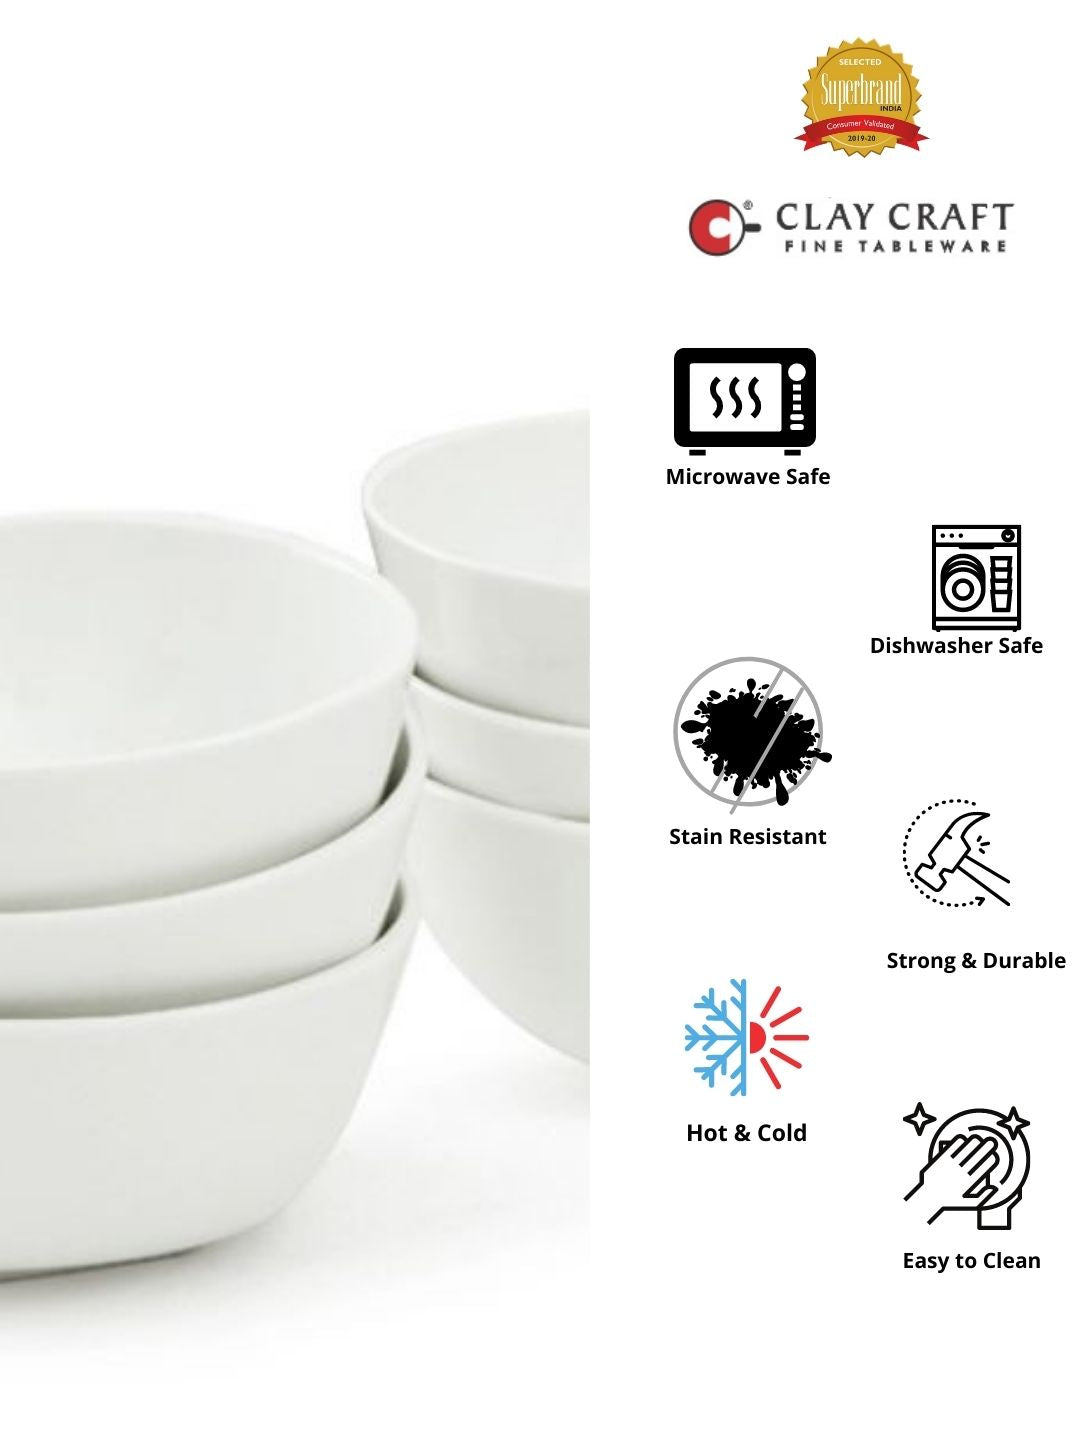 Clay Craft Basic Bowl Square 4 Piece Small Plain White